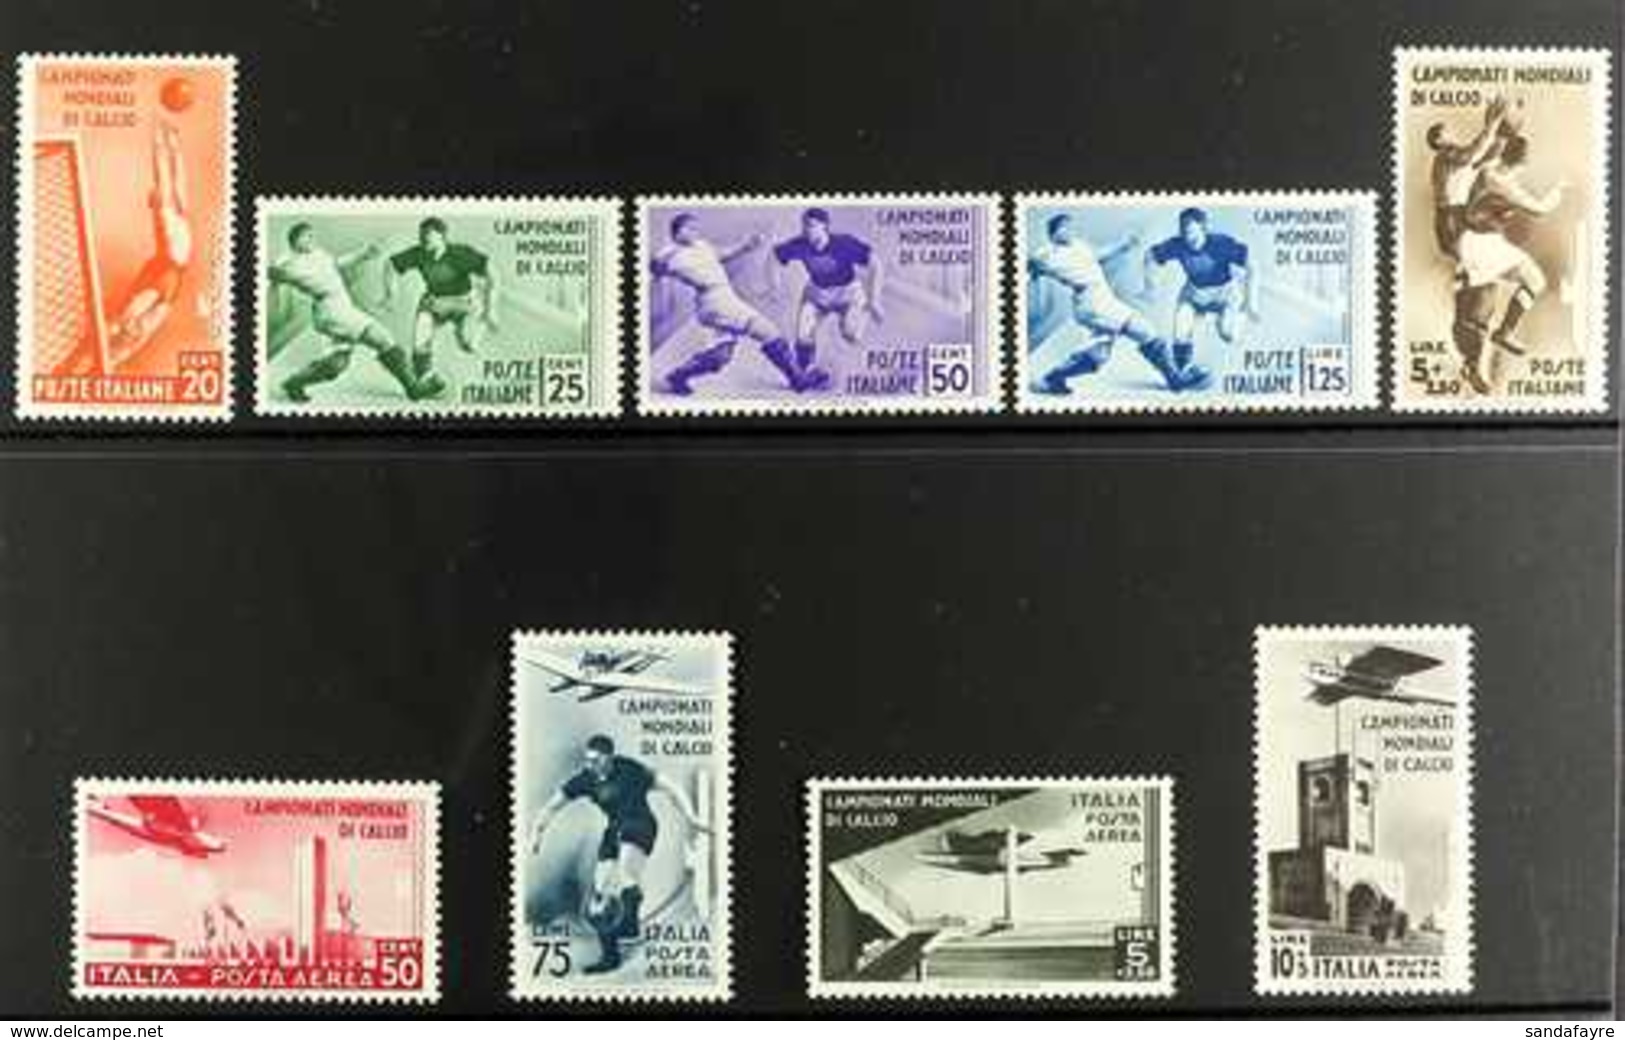 1934 World Cup Football Championship (Postage And Air) Complete Set (Sass. S. 73, SG 413/21), Never Hinged Mint. (9 Stam - Unclassified